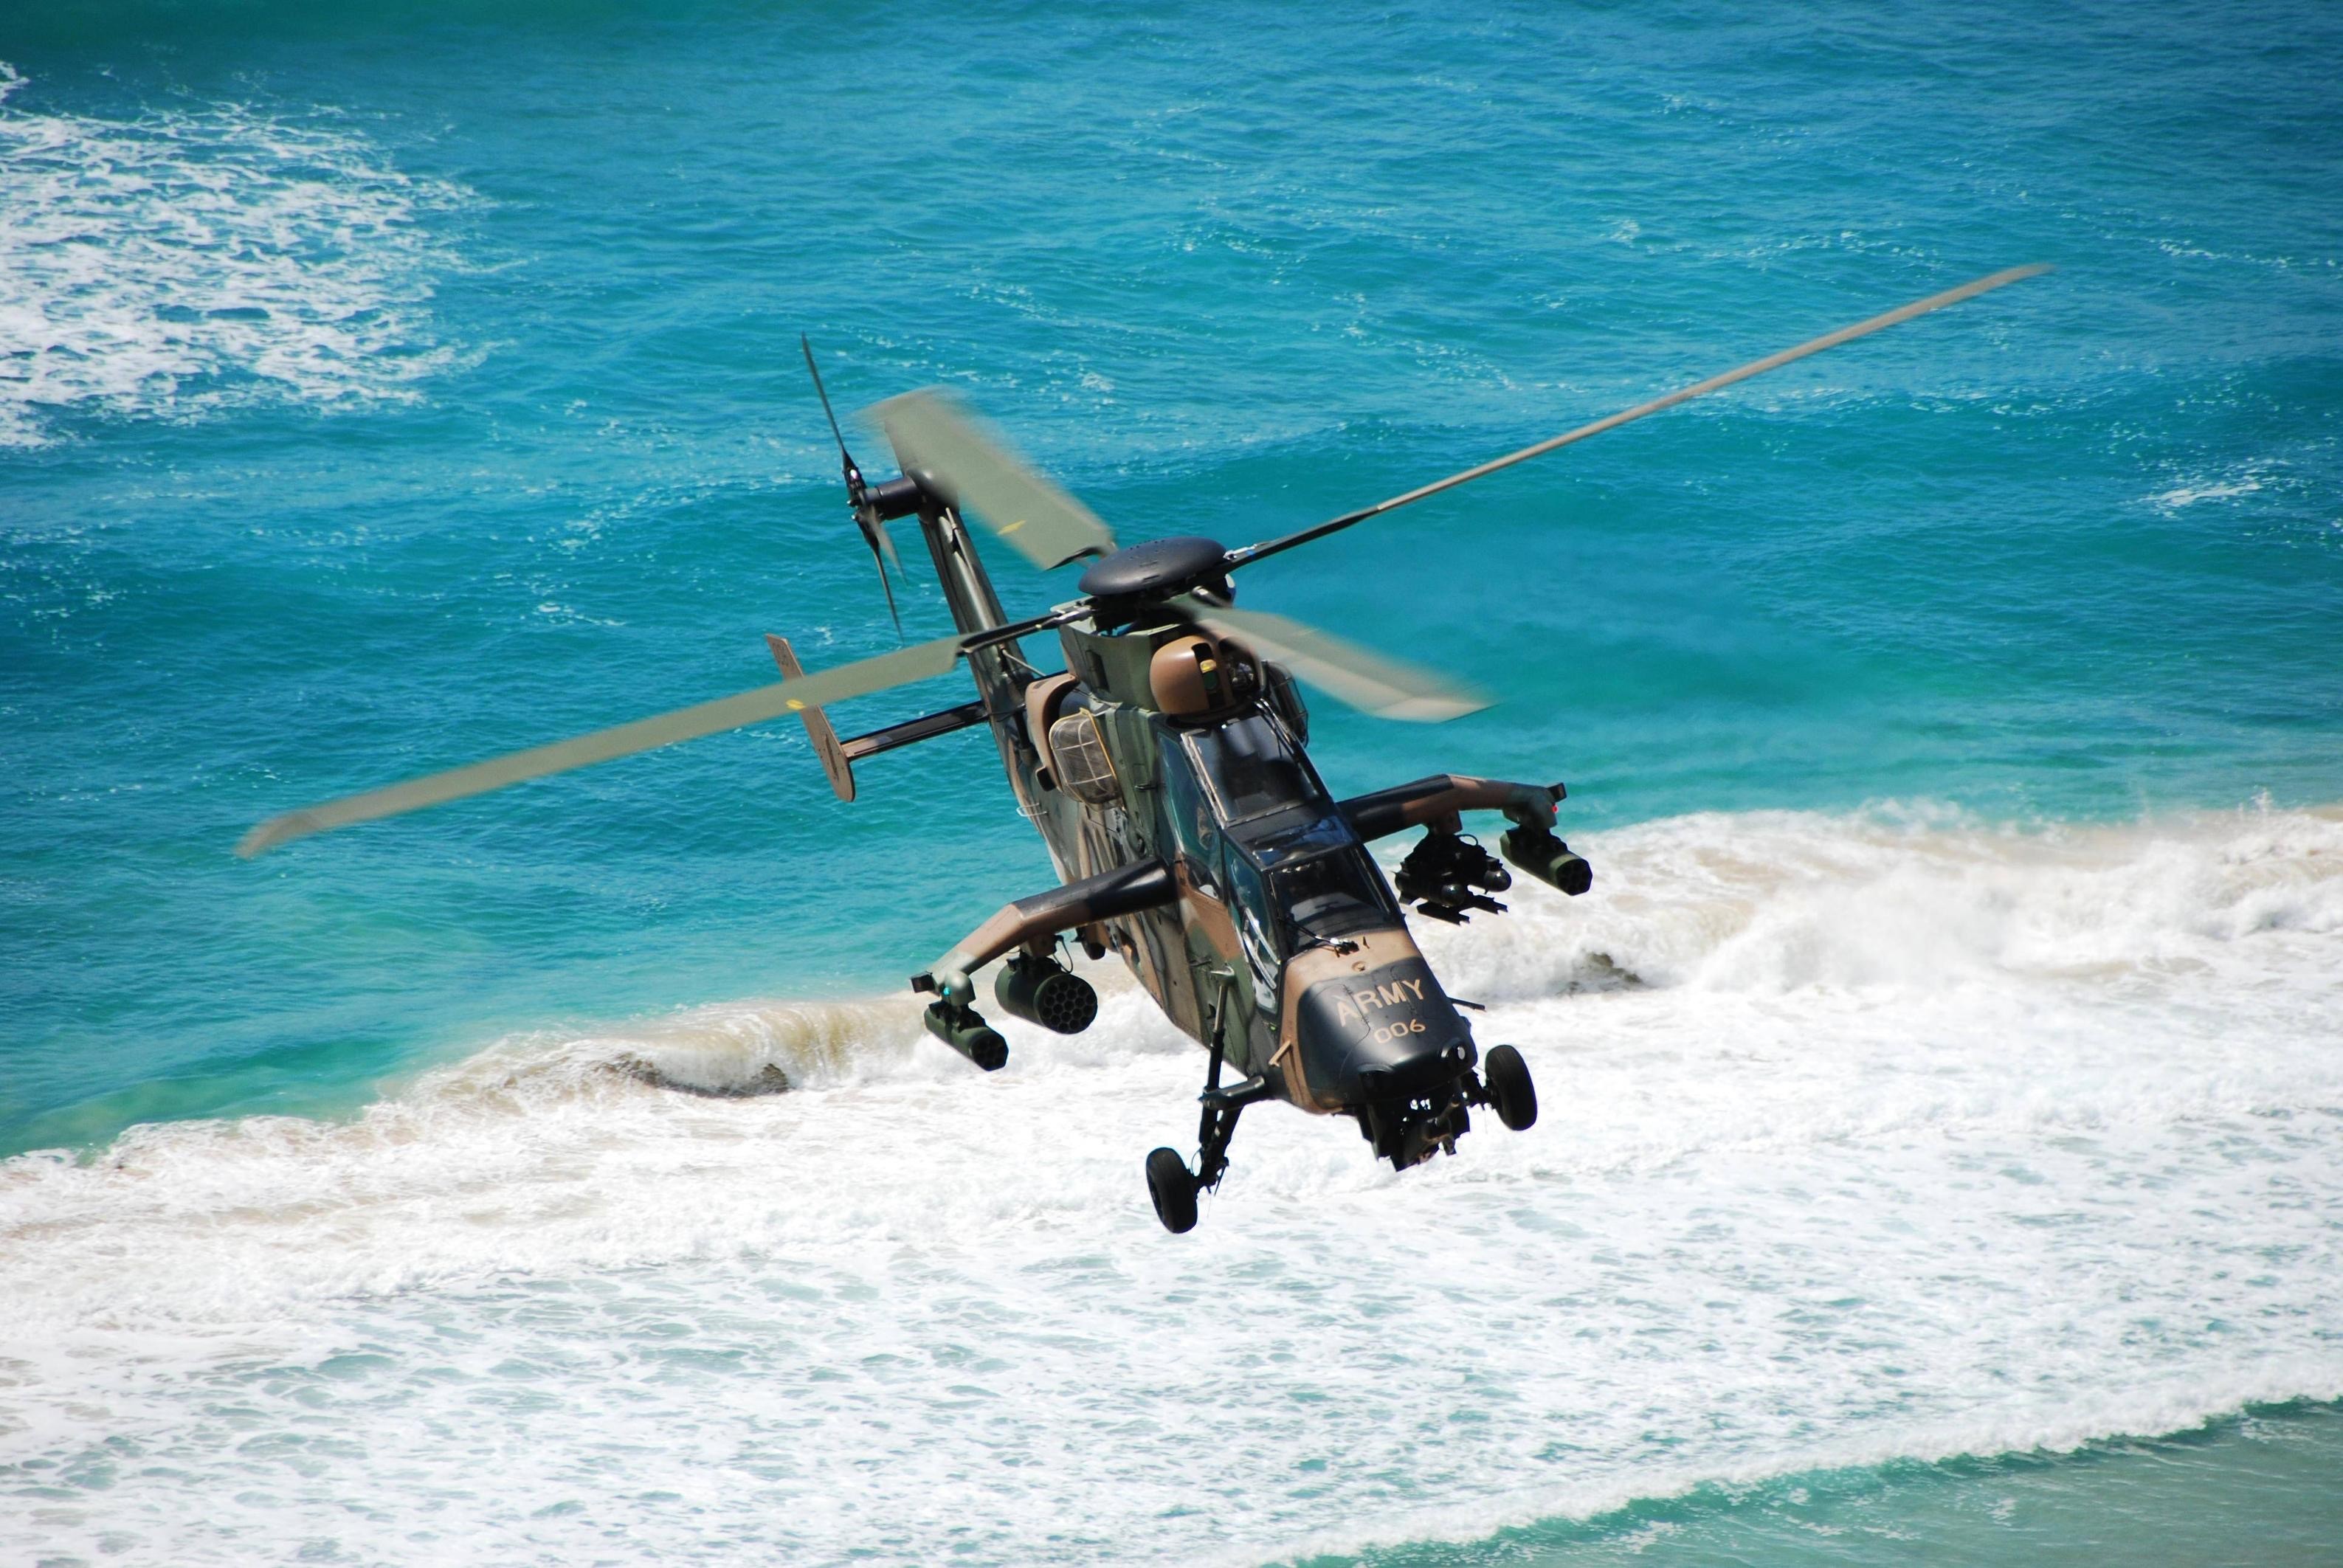 General 3175x2125 Eurocopter Tiger army Australia military vehicle aircraft attack helicopters sea french aircraft German aircraft vehicle helicopters water